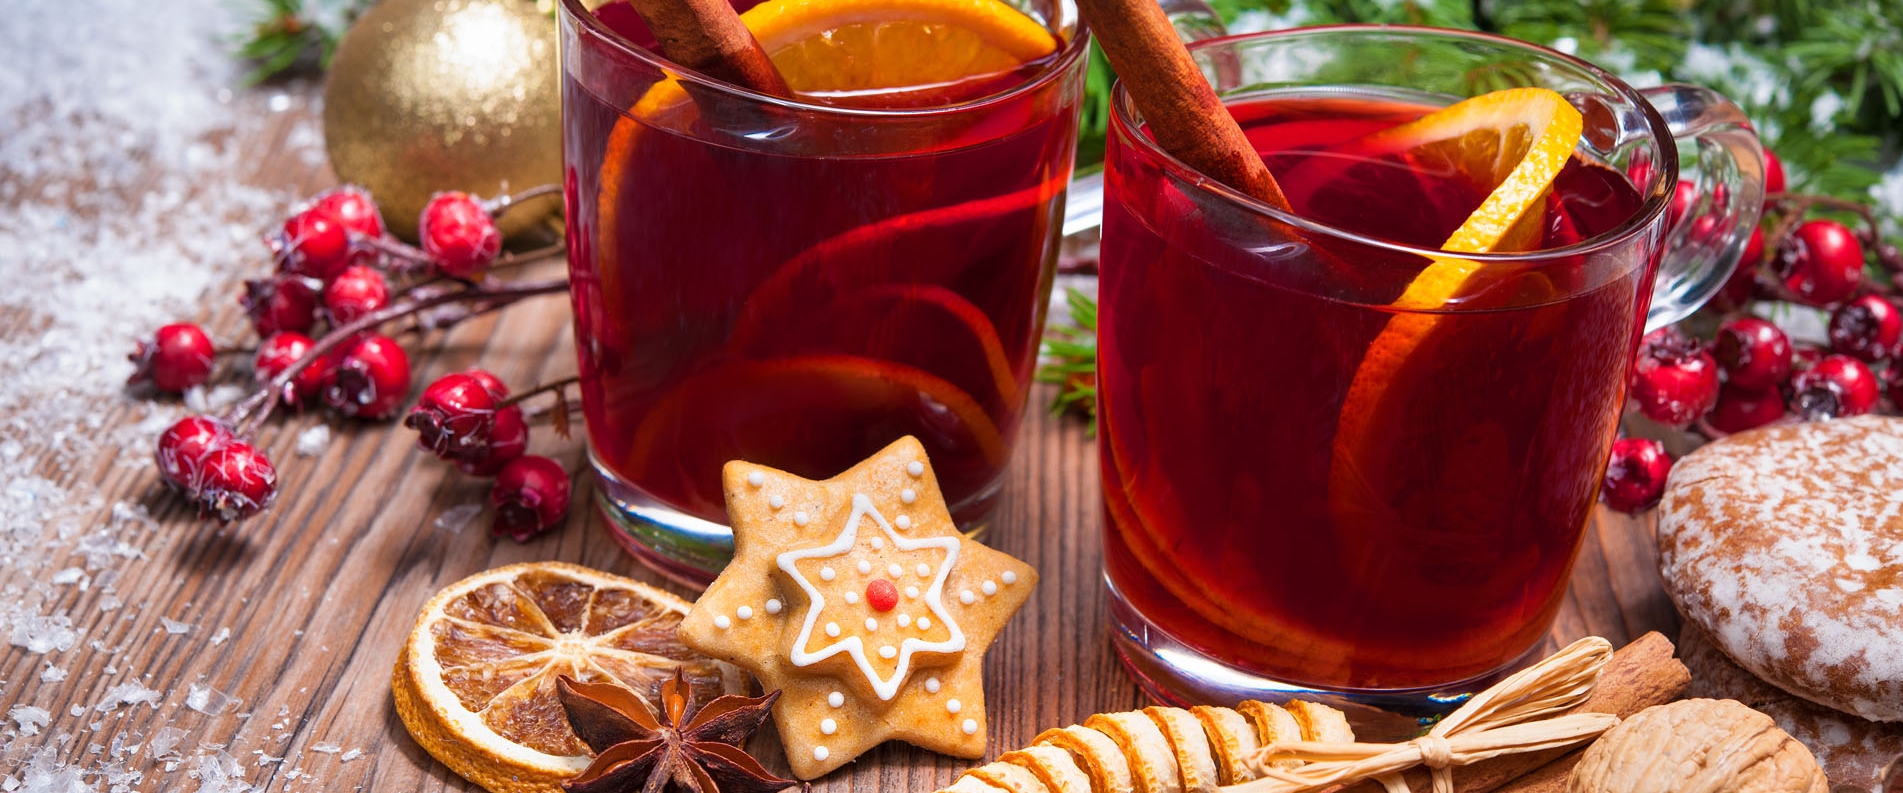 How They Celebrate Christmas in Cyprus: Traditions and Cuisine